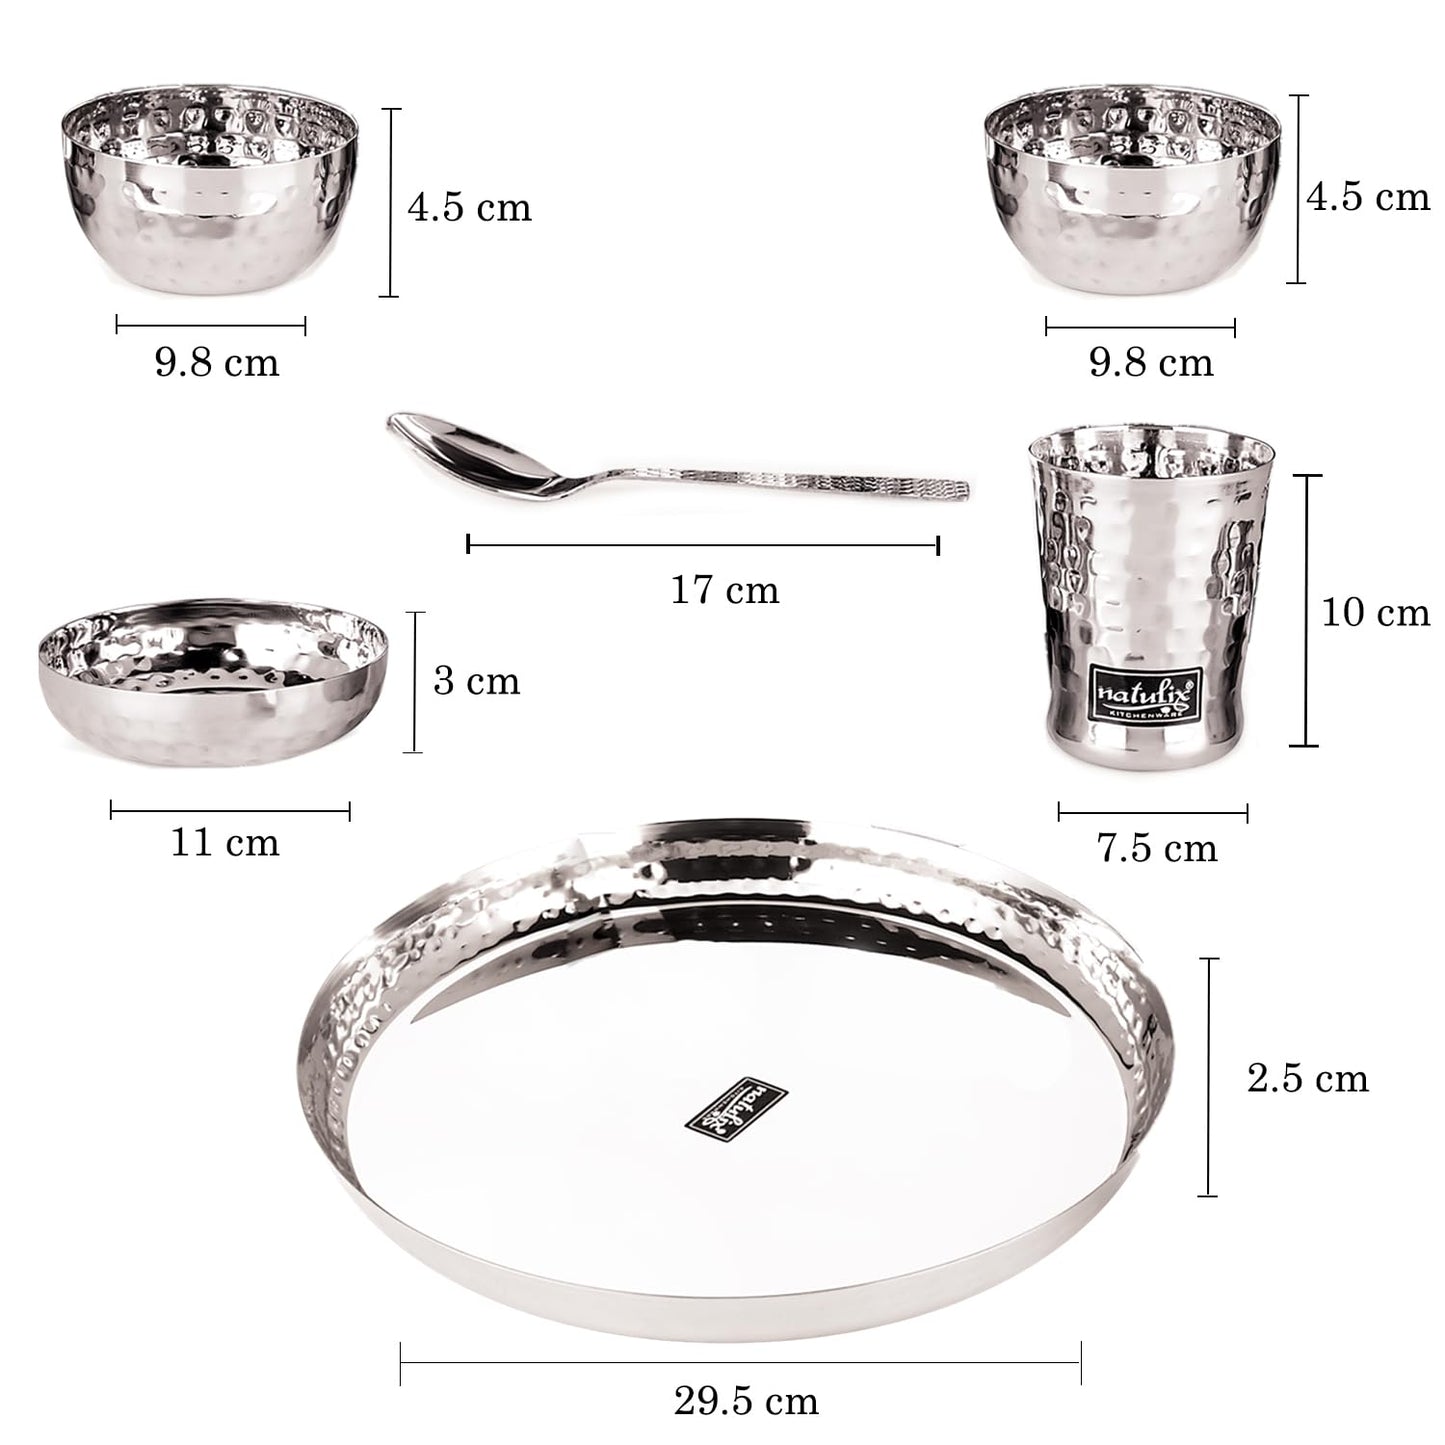 NATULIX Royal Stainless Steel Hammered Finish Dinner Set of 6 Pcs ( 1 Thali, 2 Bowl, 1 Sweet Plate, 1 Spoon & 1 Glass)